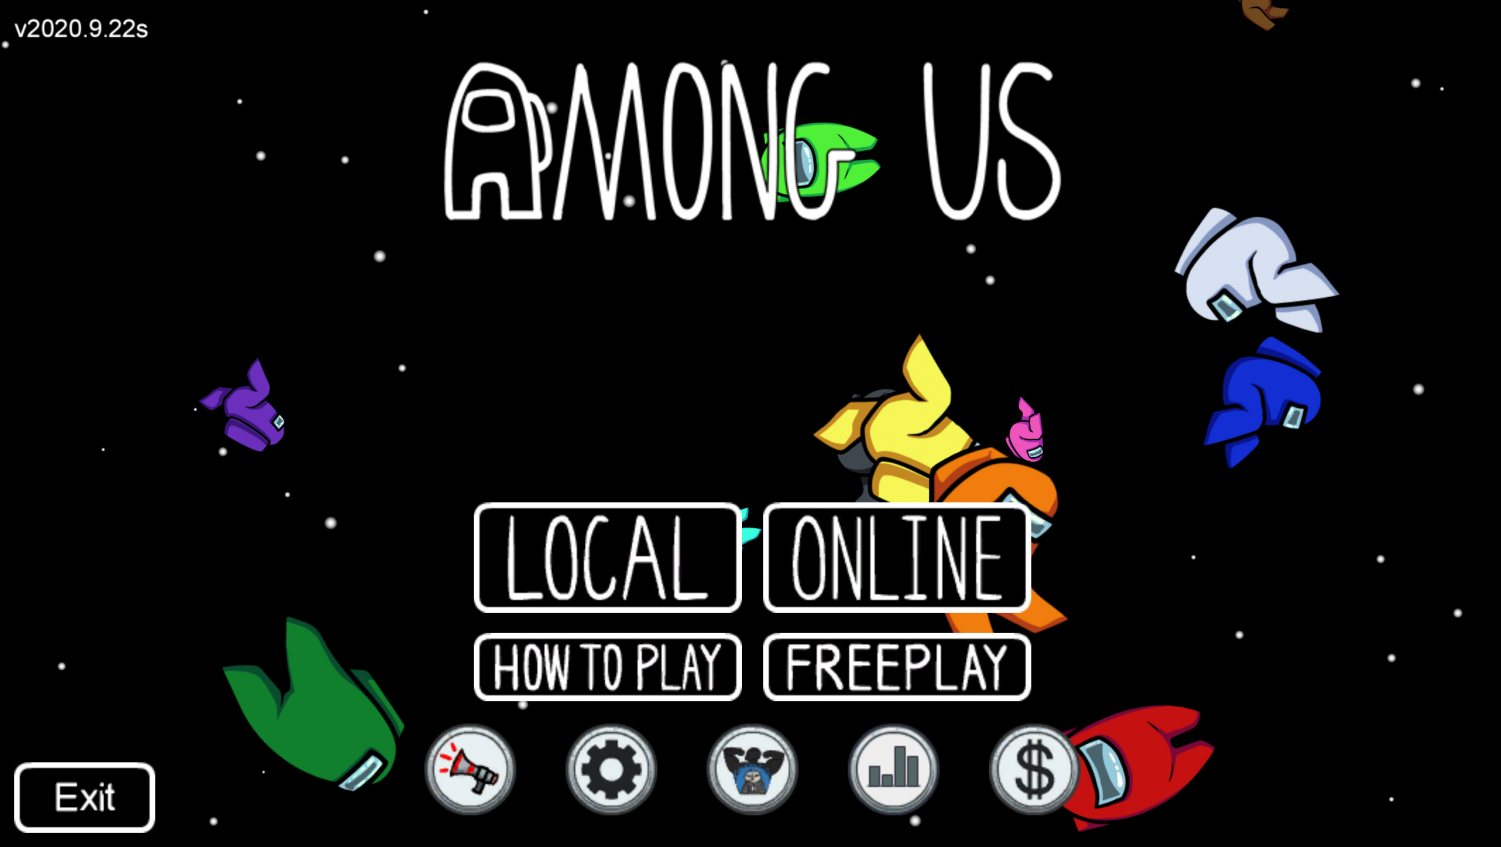 Among Us Online — Play for free at